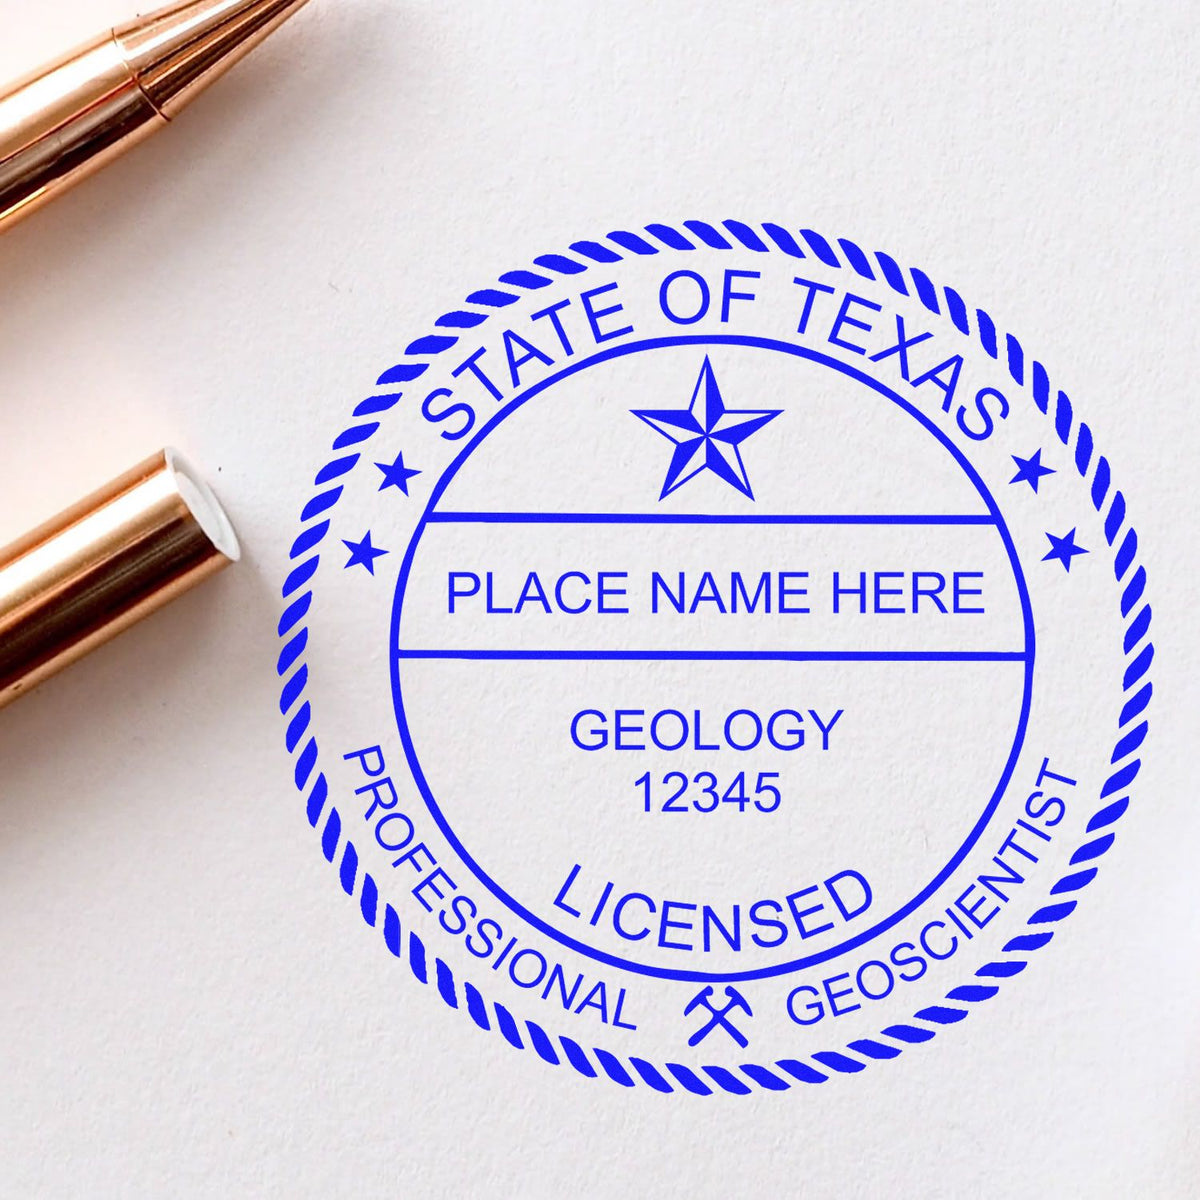 An alternative view of the Self-Inking Texas Geologist Stamp stamped on a sheet of paper showing the image in use